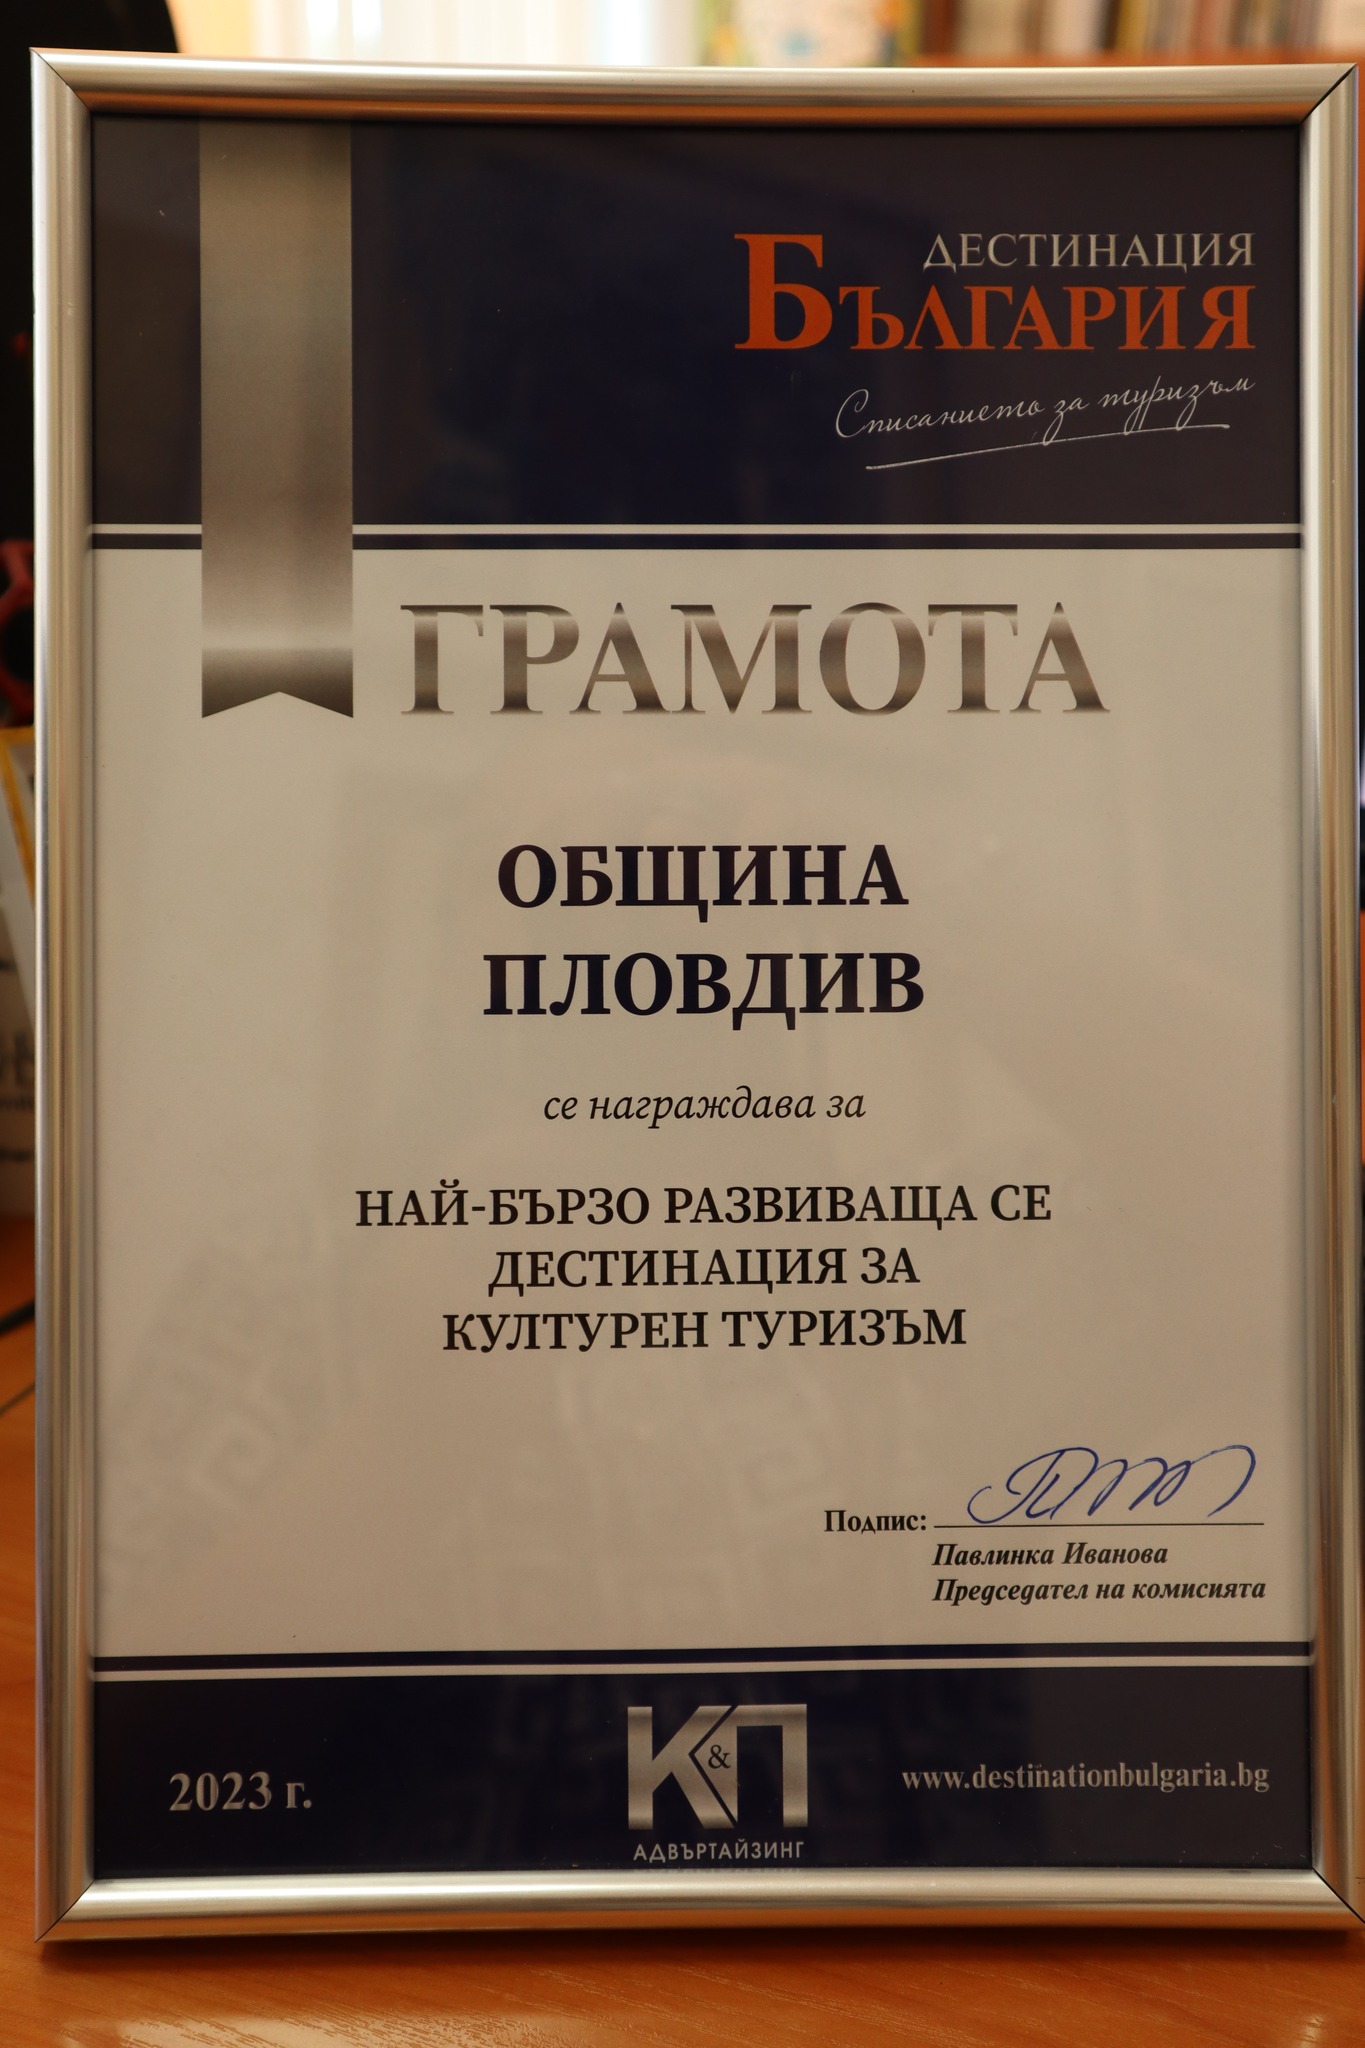 Plovdiv with the prize of "Fastest growing destination for cultural tourism"